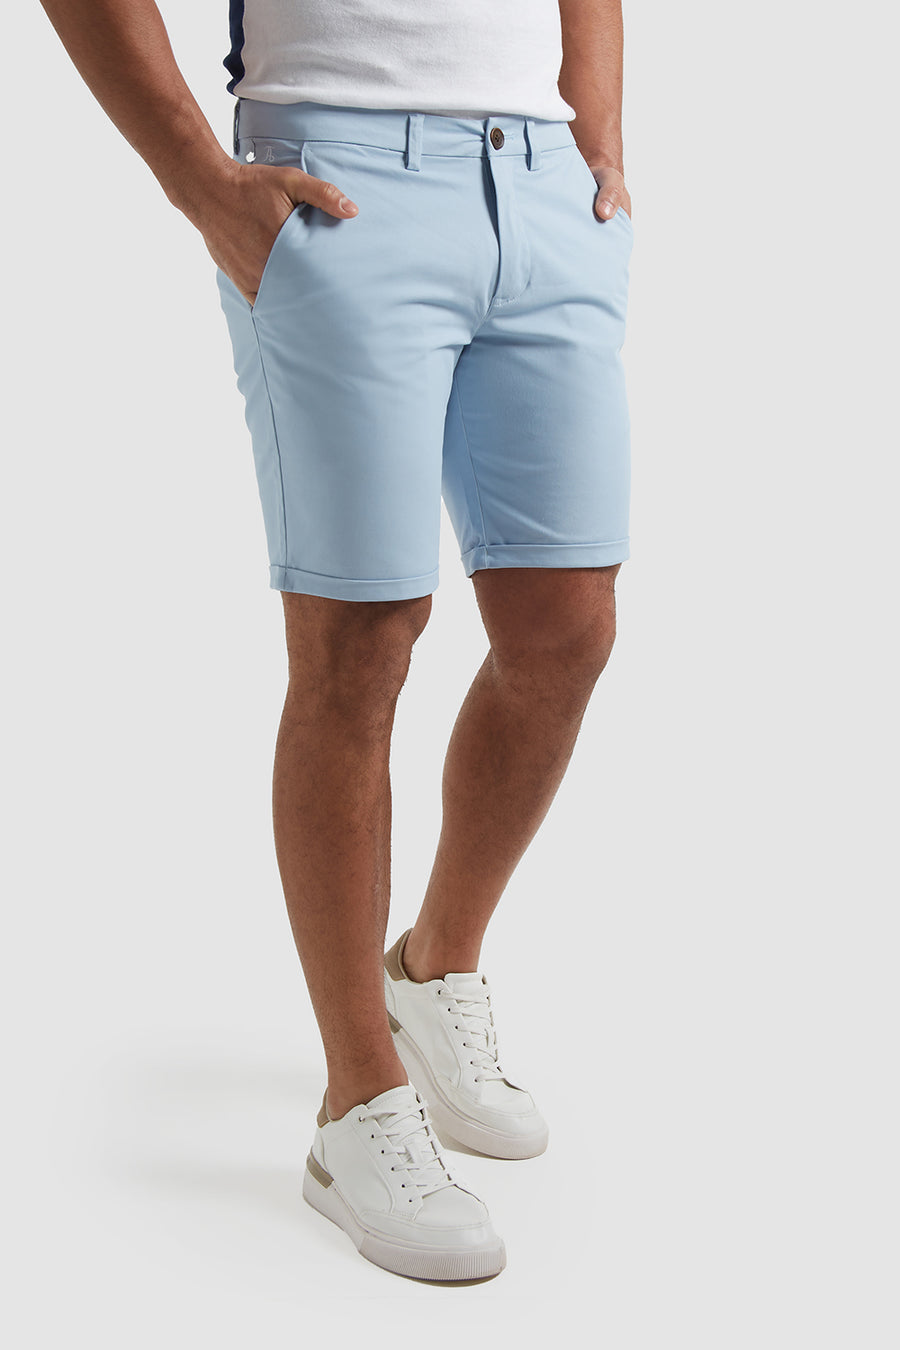 Athletic Fit Chino TAILORED in ATHLETE USA Navy - Shorts 